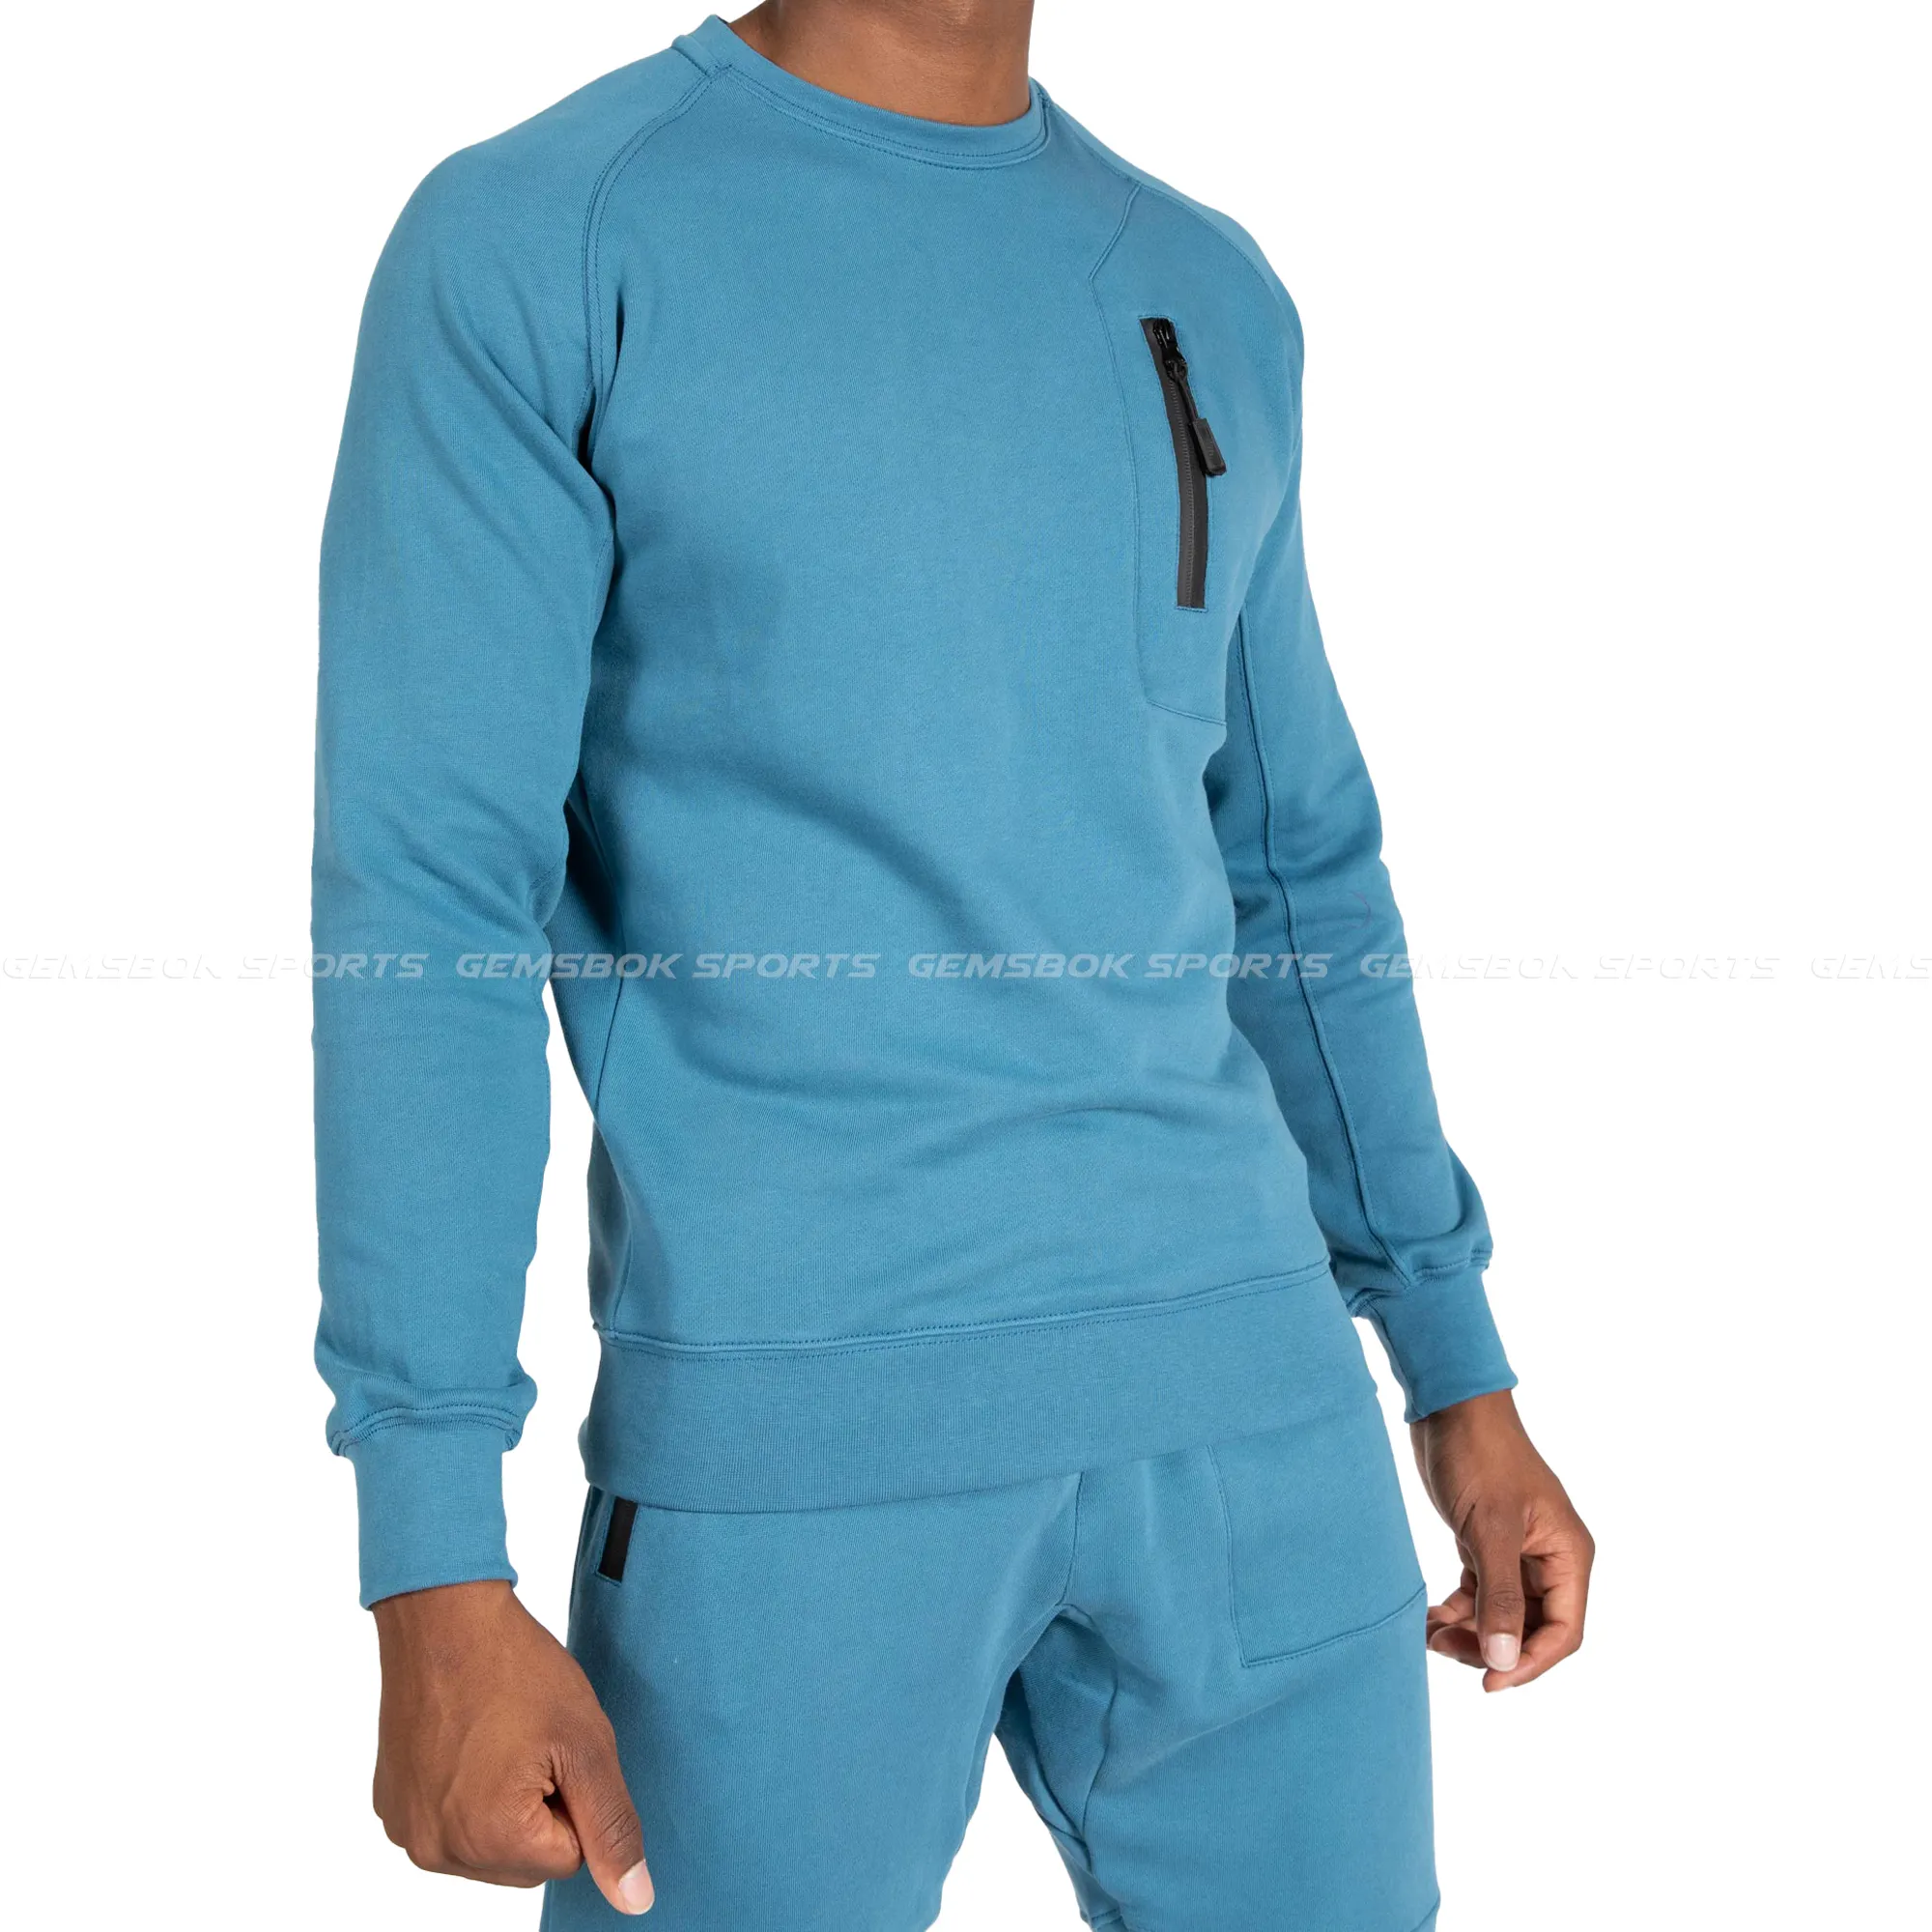 New Arrival High Quality Zipped Chest Pocket Sweatshirts wholesale perfect for both workouts and casual occasions.